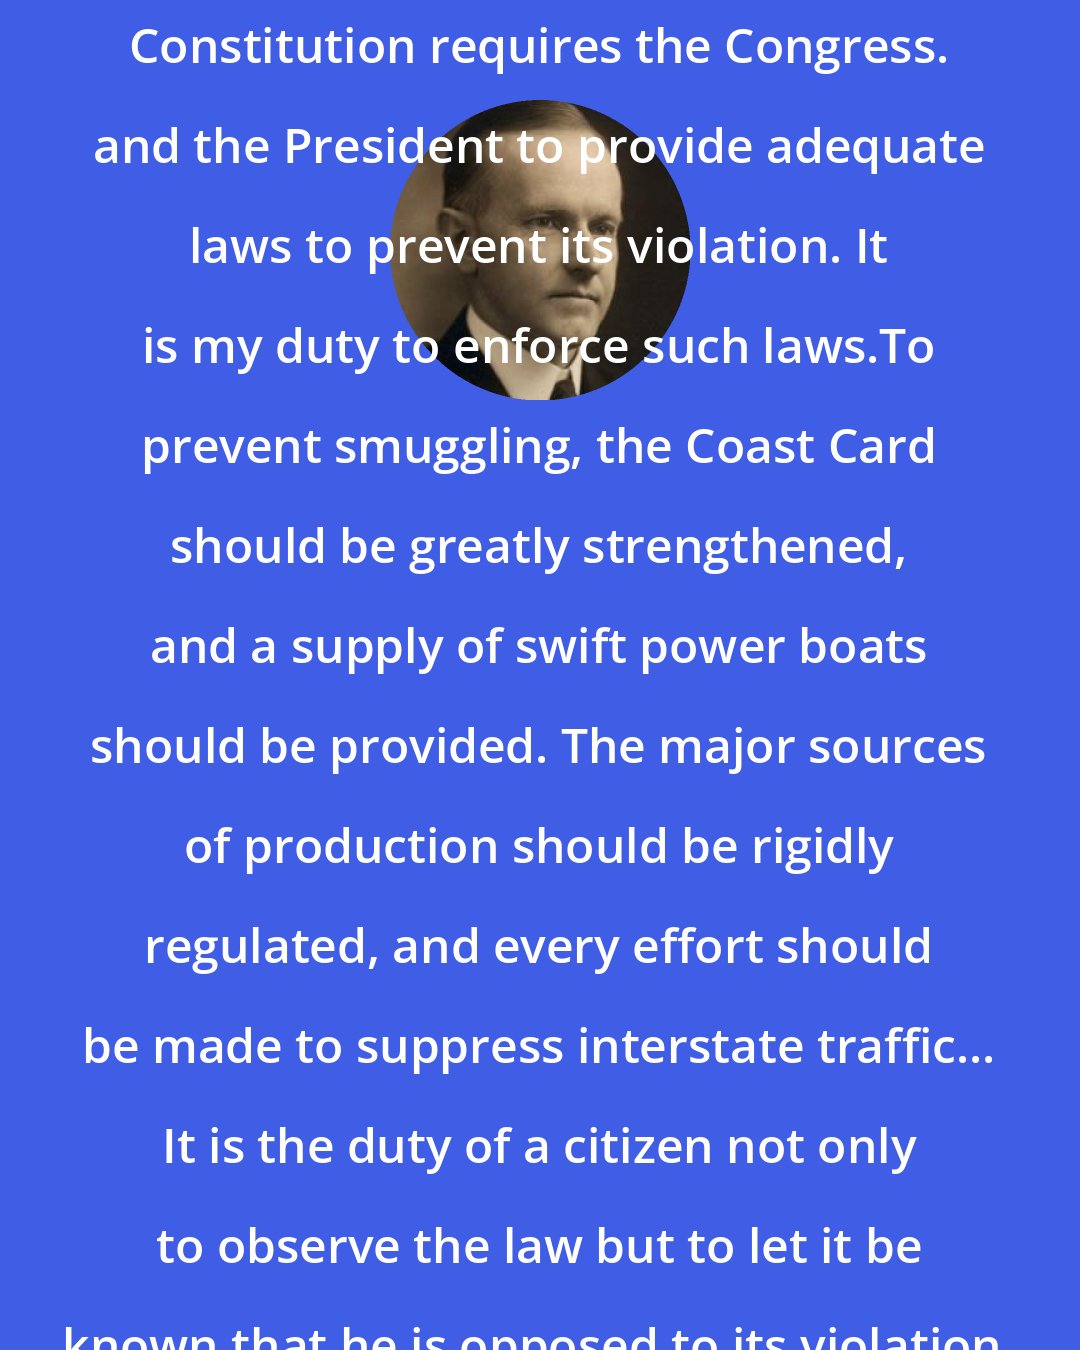 Calvin Coolidge: The prohibition amendment to the Constitution requires the Congress. and the President to provide adequate laws to prevent its violation. It is my duty to enforce such laws.To prevent smuggling, the Coast Card should be greatly strengthened, and a supply of swift power boats should be provided. The major sources of production should be rigidly regulated, and every effort should be made to suppress interstate traffic... It is the duty of a citizen not only to observe the law but to let it be known that he is opposed to its violation.